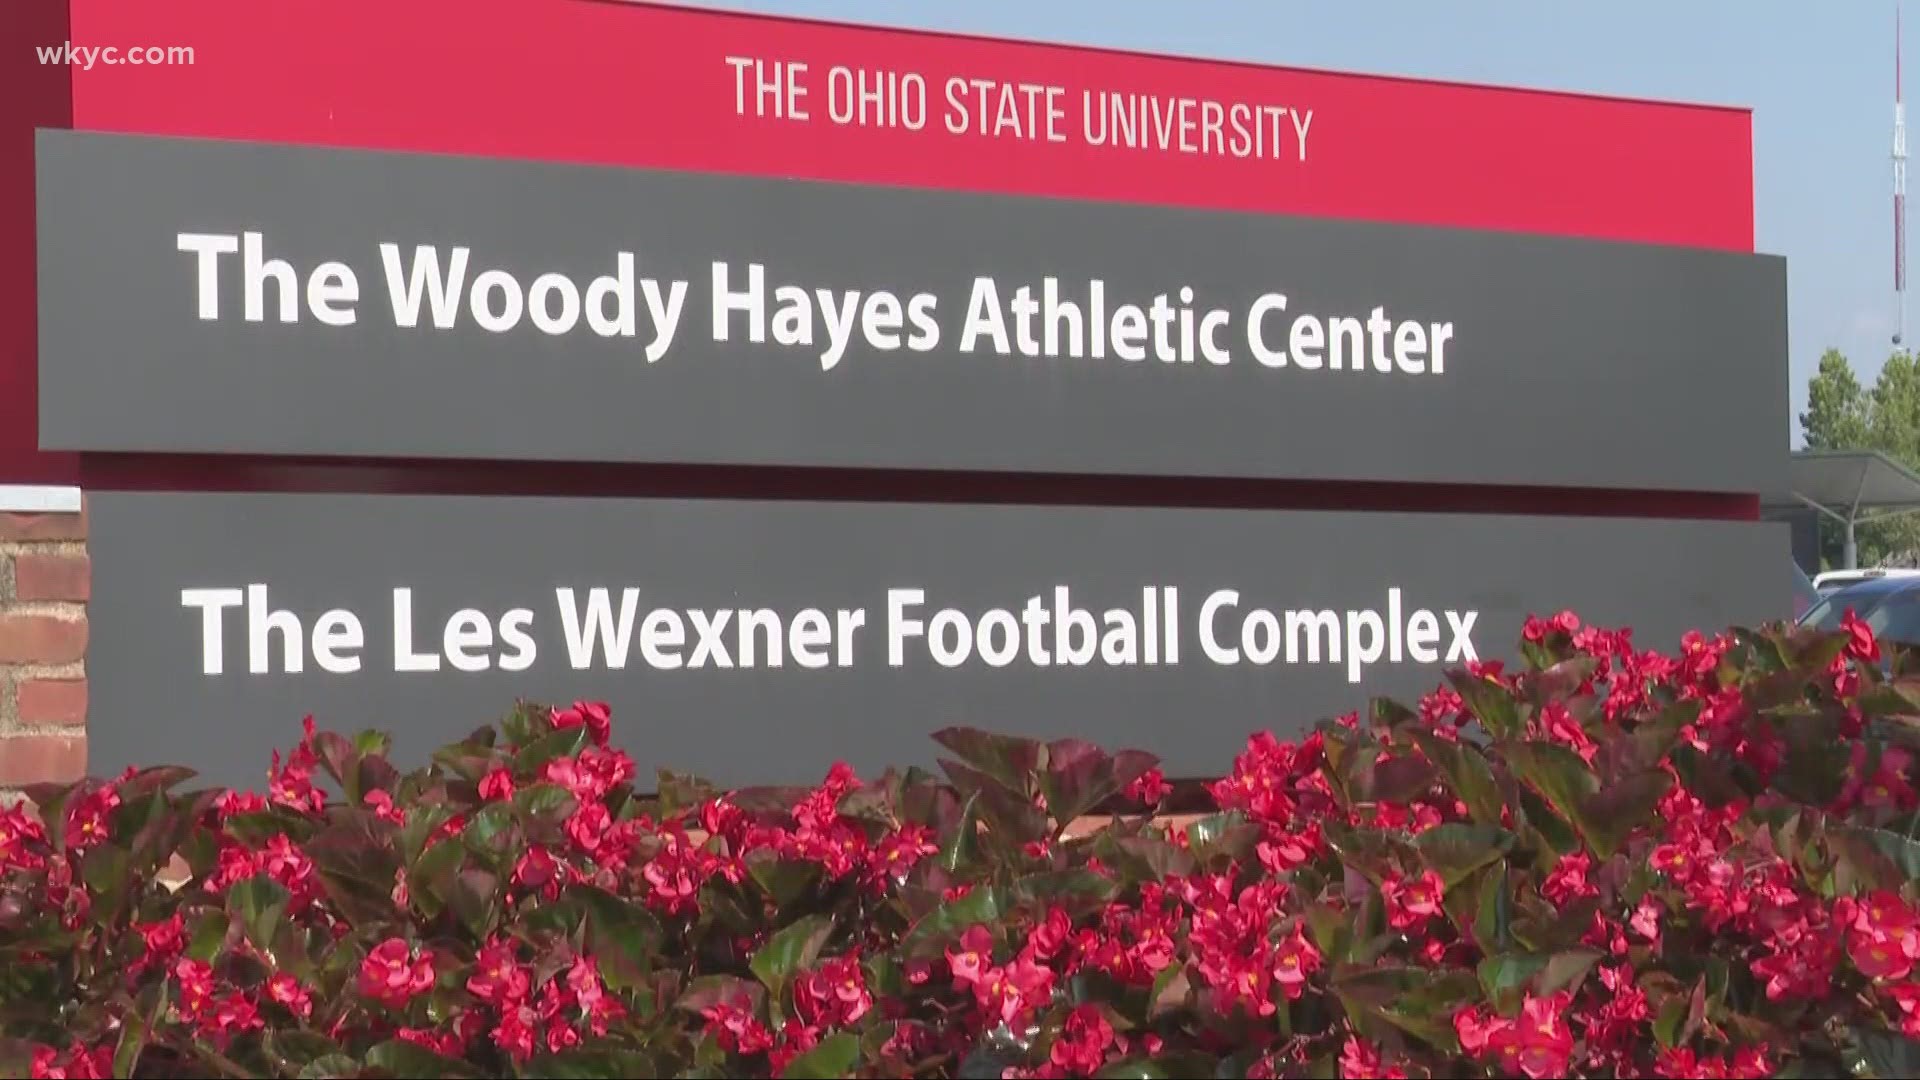 One of Hollywood's most famous faces is preparing to tackle the decade-long abuse scandal at the Ohio State University. Lynna Lai reports.